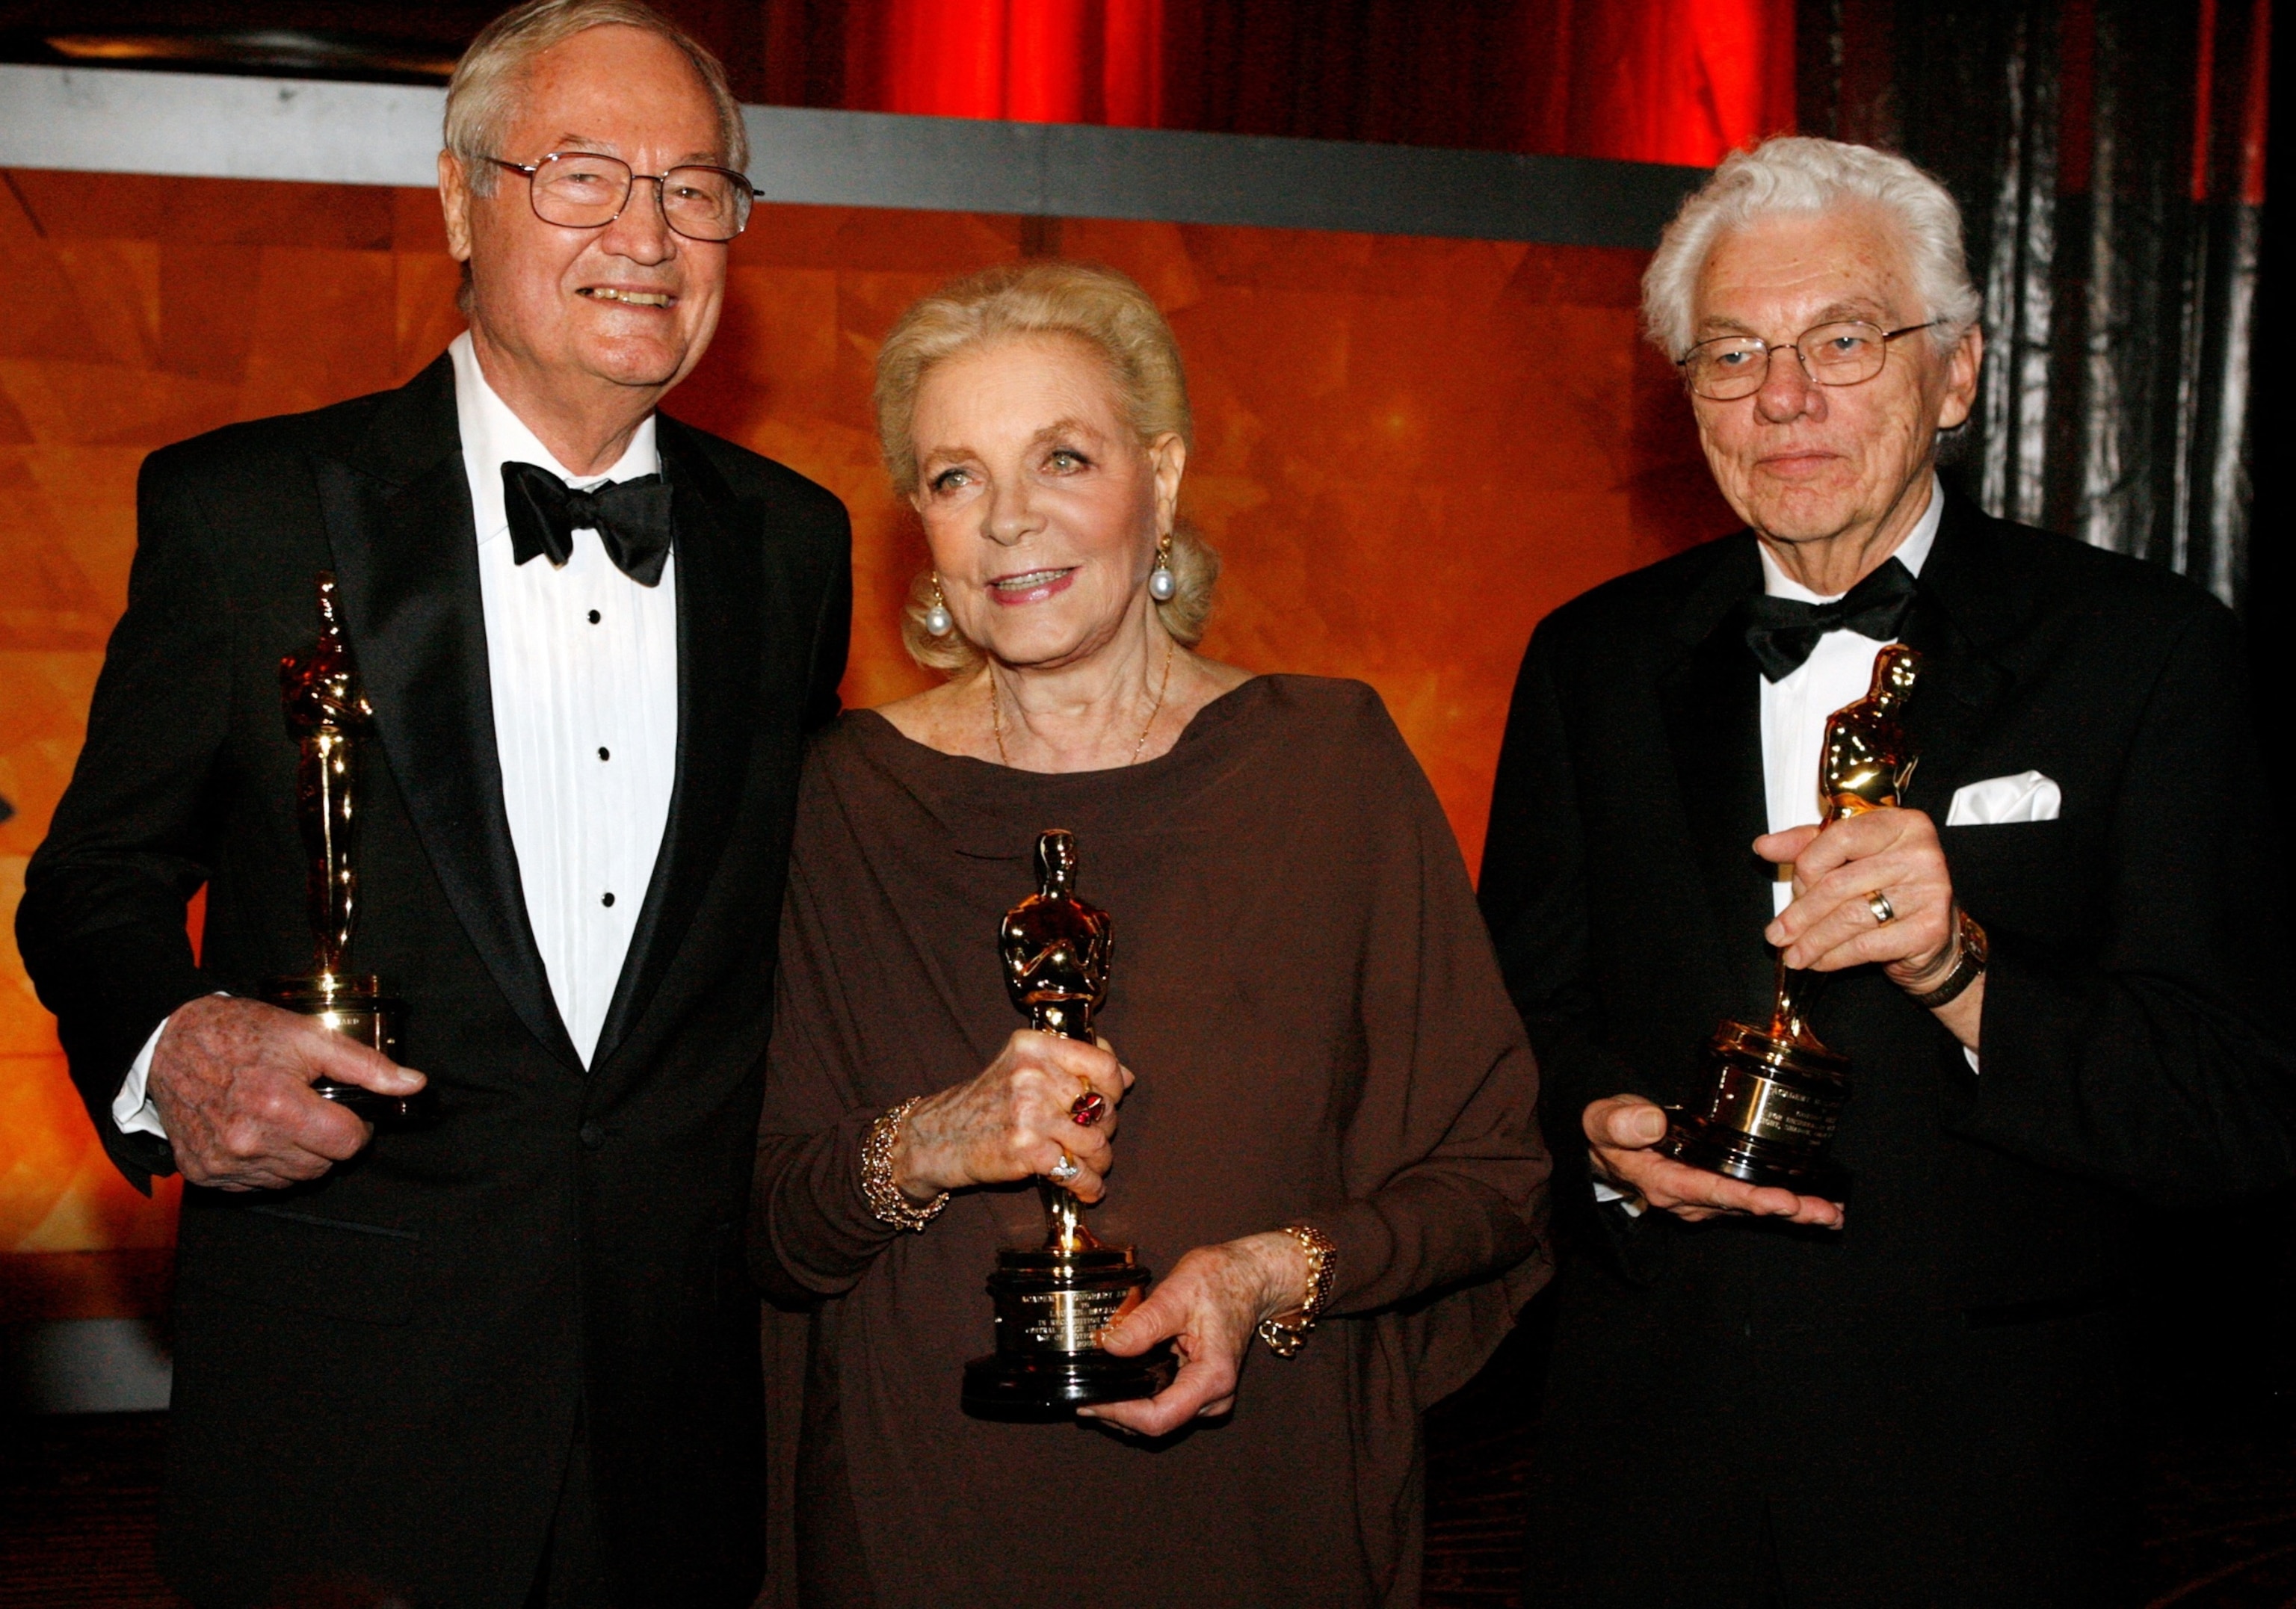 PHOTO: Filmmaker Roger Corman, left, poses with actress Lauren Bacall, center, and cinematographer Gordon Willis, right, with their Honorary Oscars in Hollywood, California, Nov. 14, 2009.